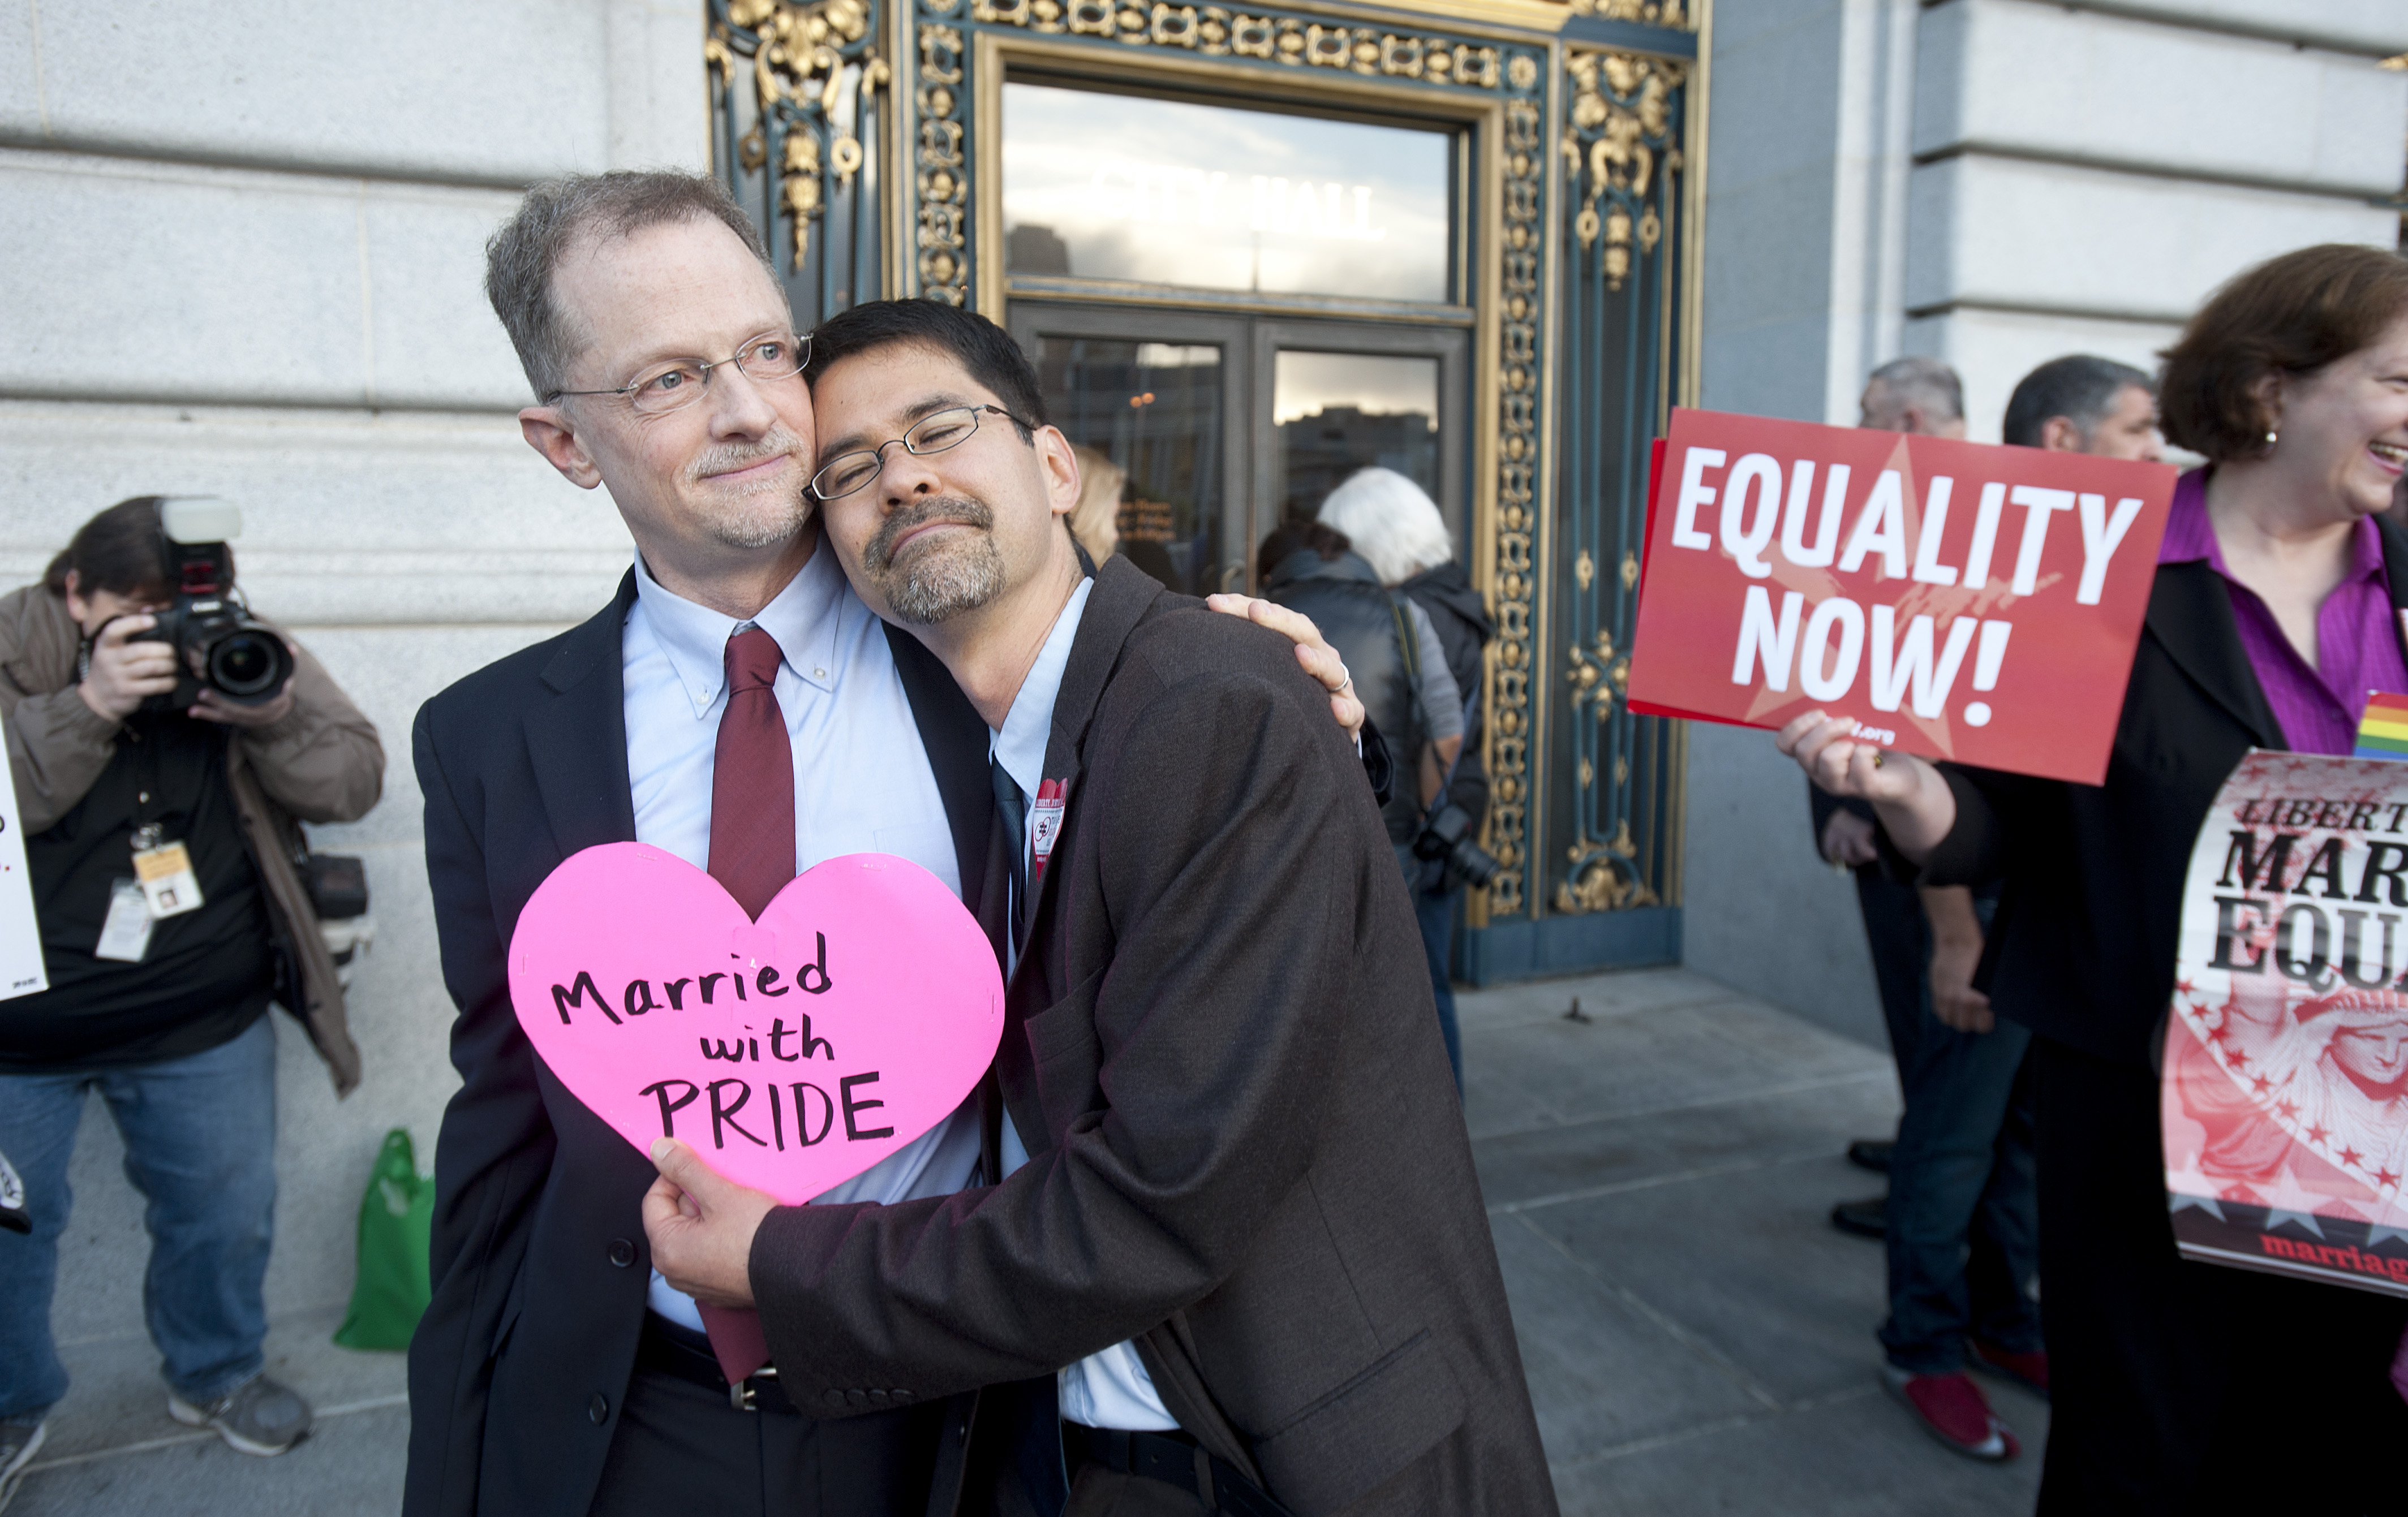 One Year After Doma Ruling Same Sex Couples Still Face Benefits Gaps 4367